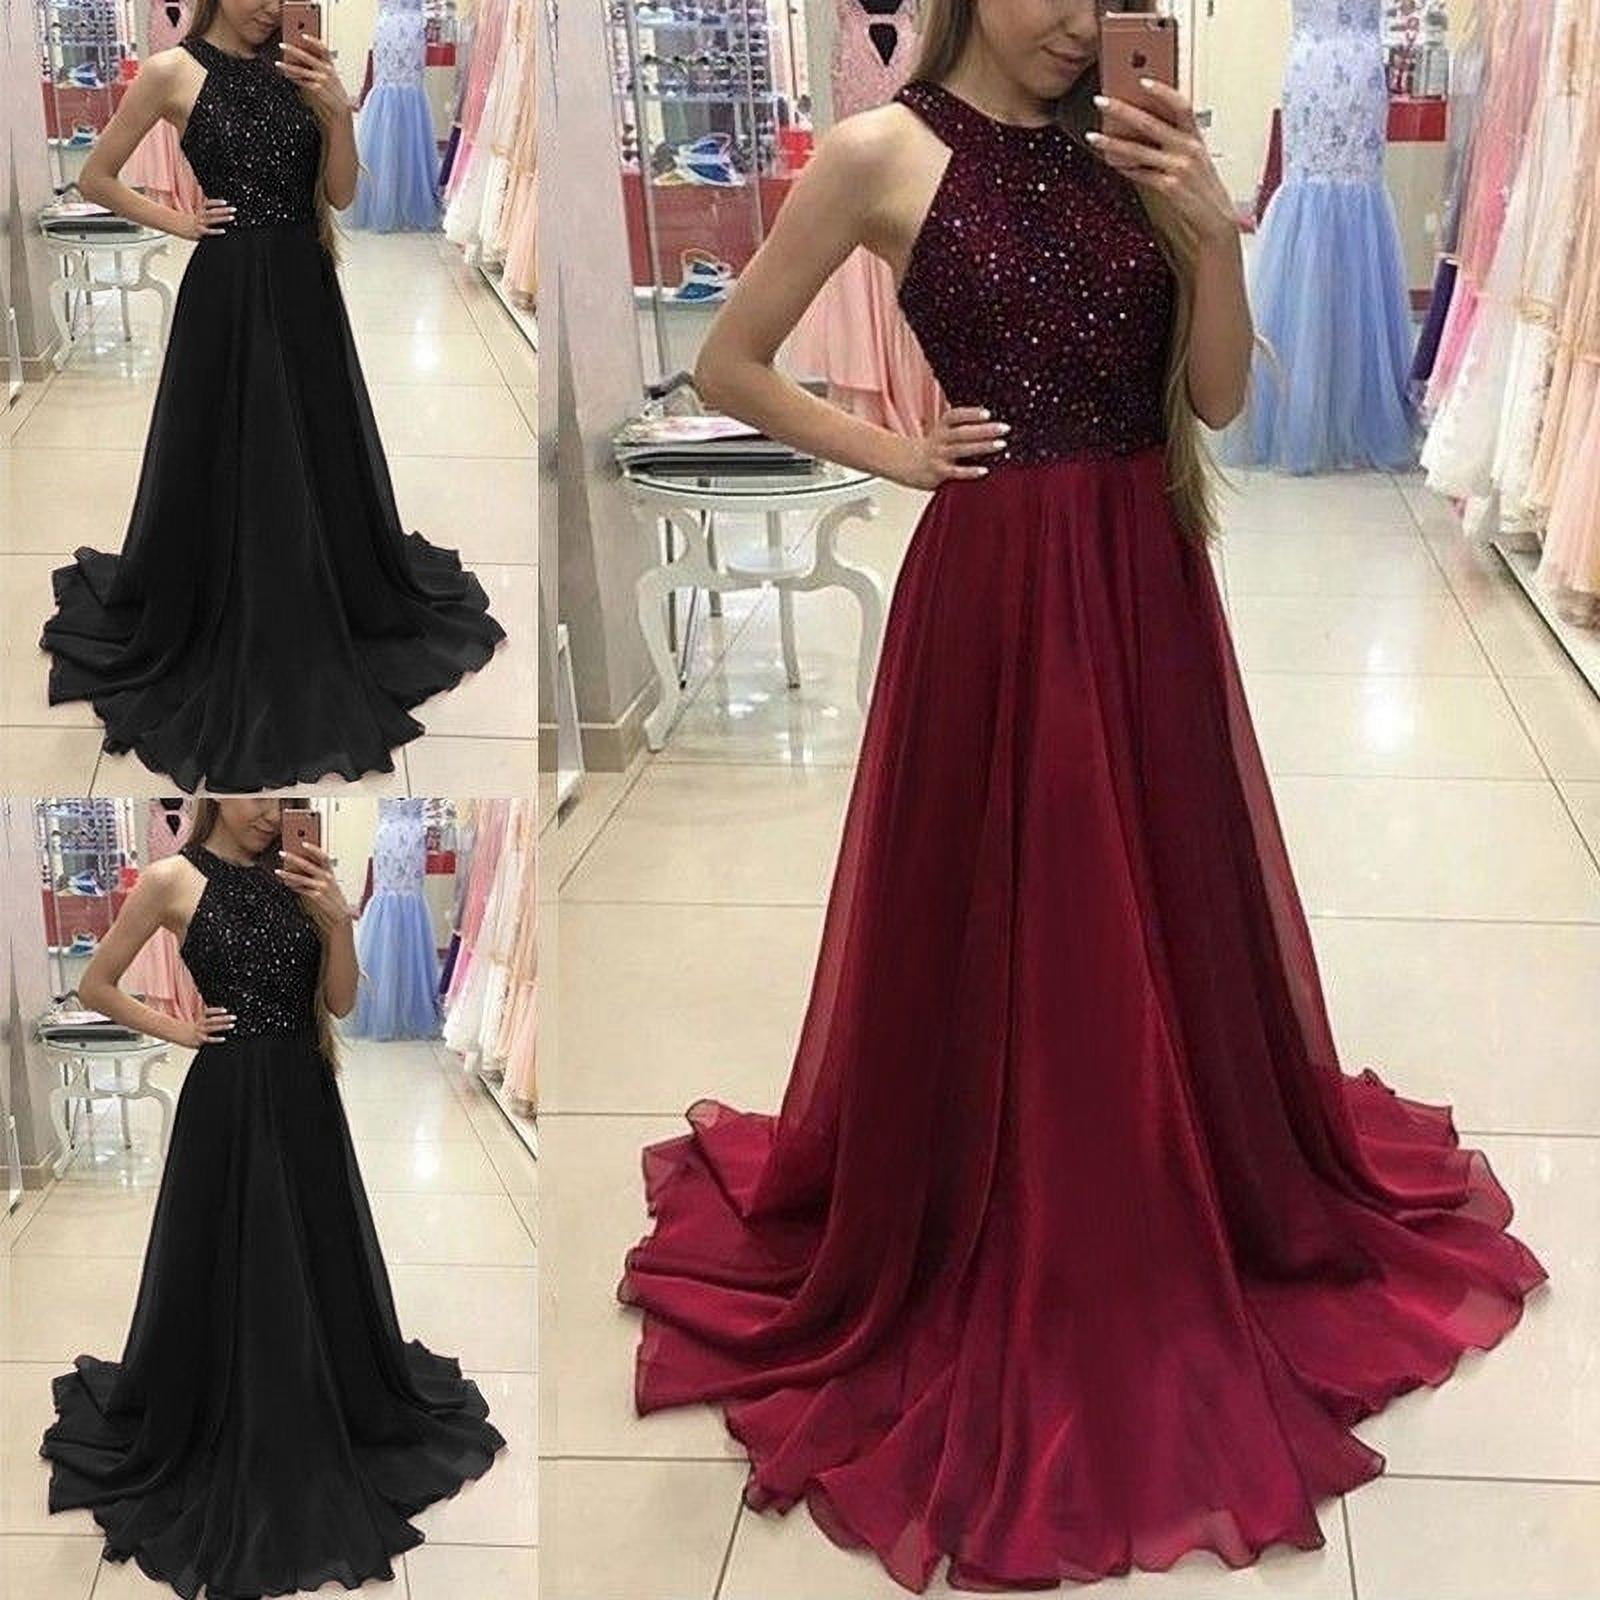 New Wedding Formal Long Evening Ball Gown Party Prom Bridesmaid Dress Size 6-20 